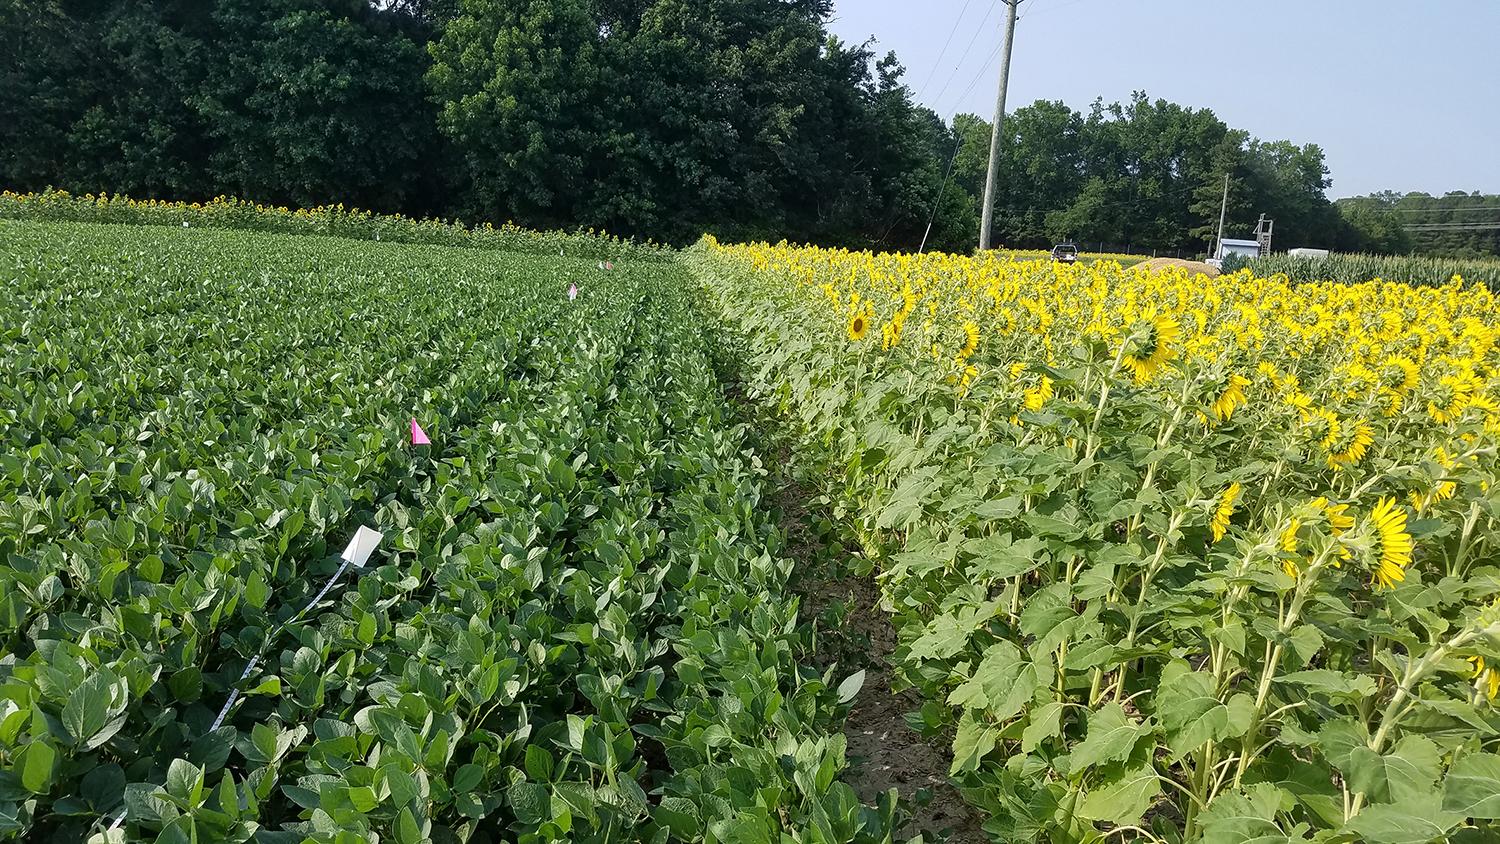 Figure 8. Sunflowers planted between a field previously planted with soybeans and one currently planted with soybeans. This arrangement may attract Dectes stem borer adults to the sunflower plants, and keep them from infesting soybean plants. Photo: David Owens